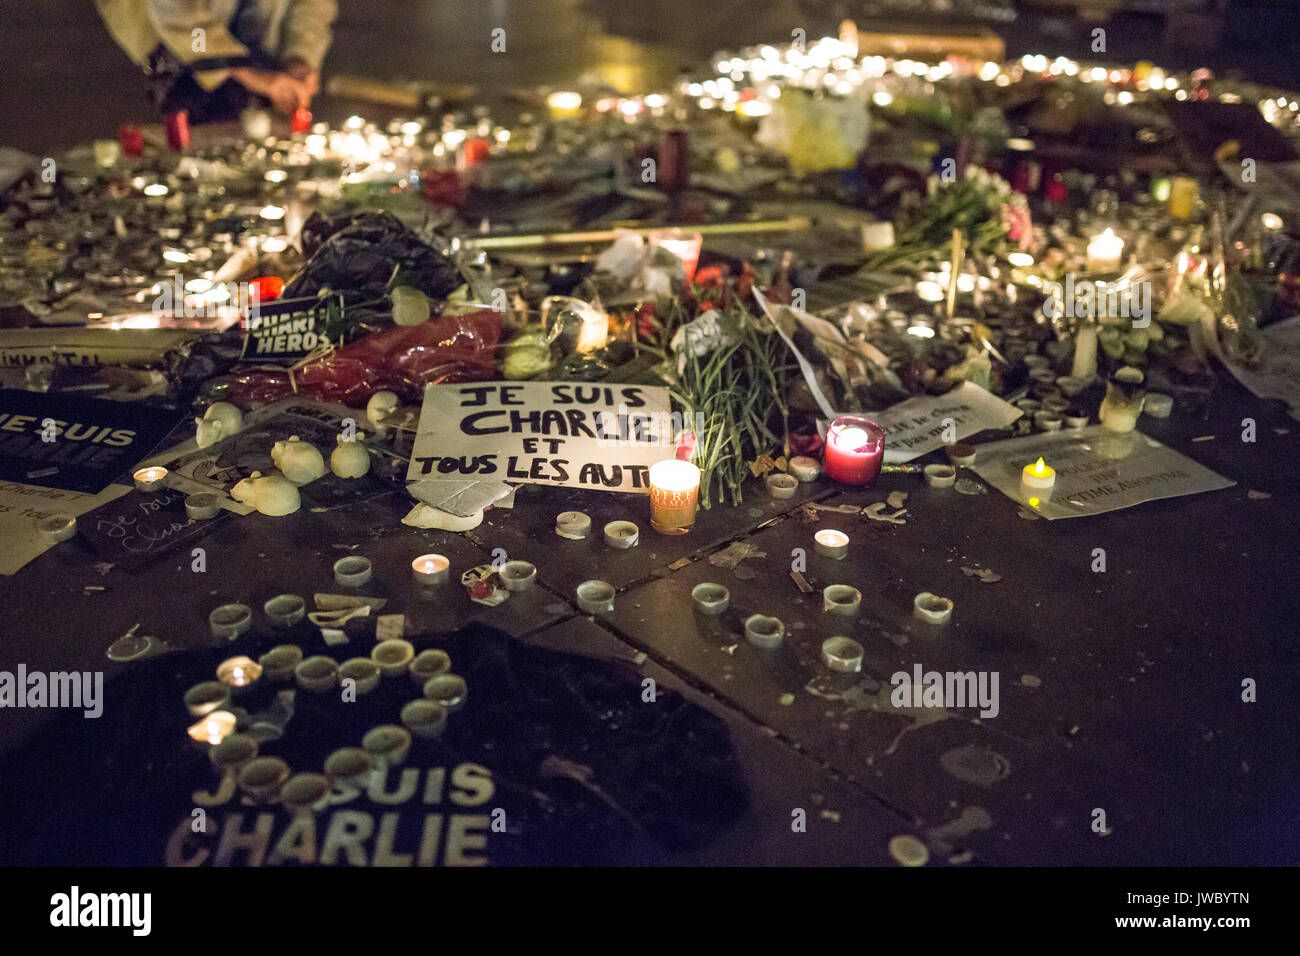 je suis charlie et tous les autres. Homage at the victims of Charlie hebdo killing in Paris the 7th of january 2015. Stock Photo